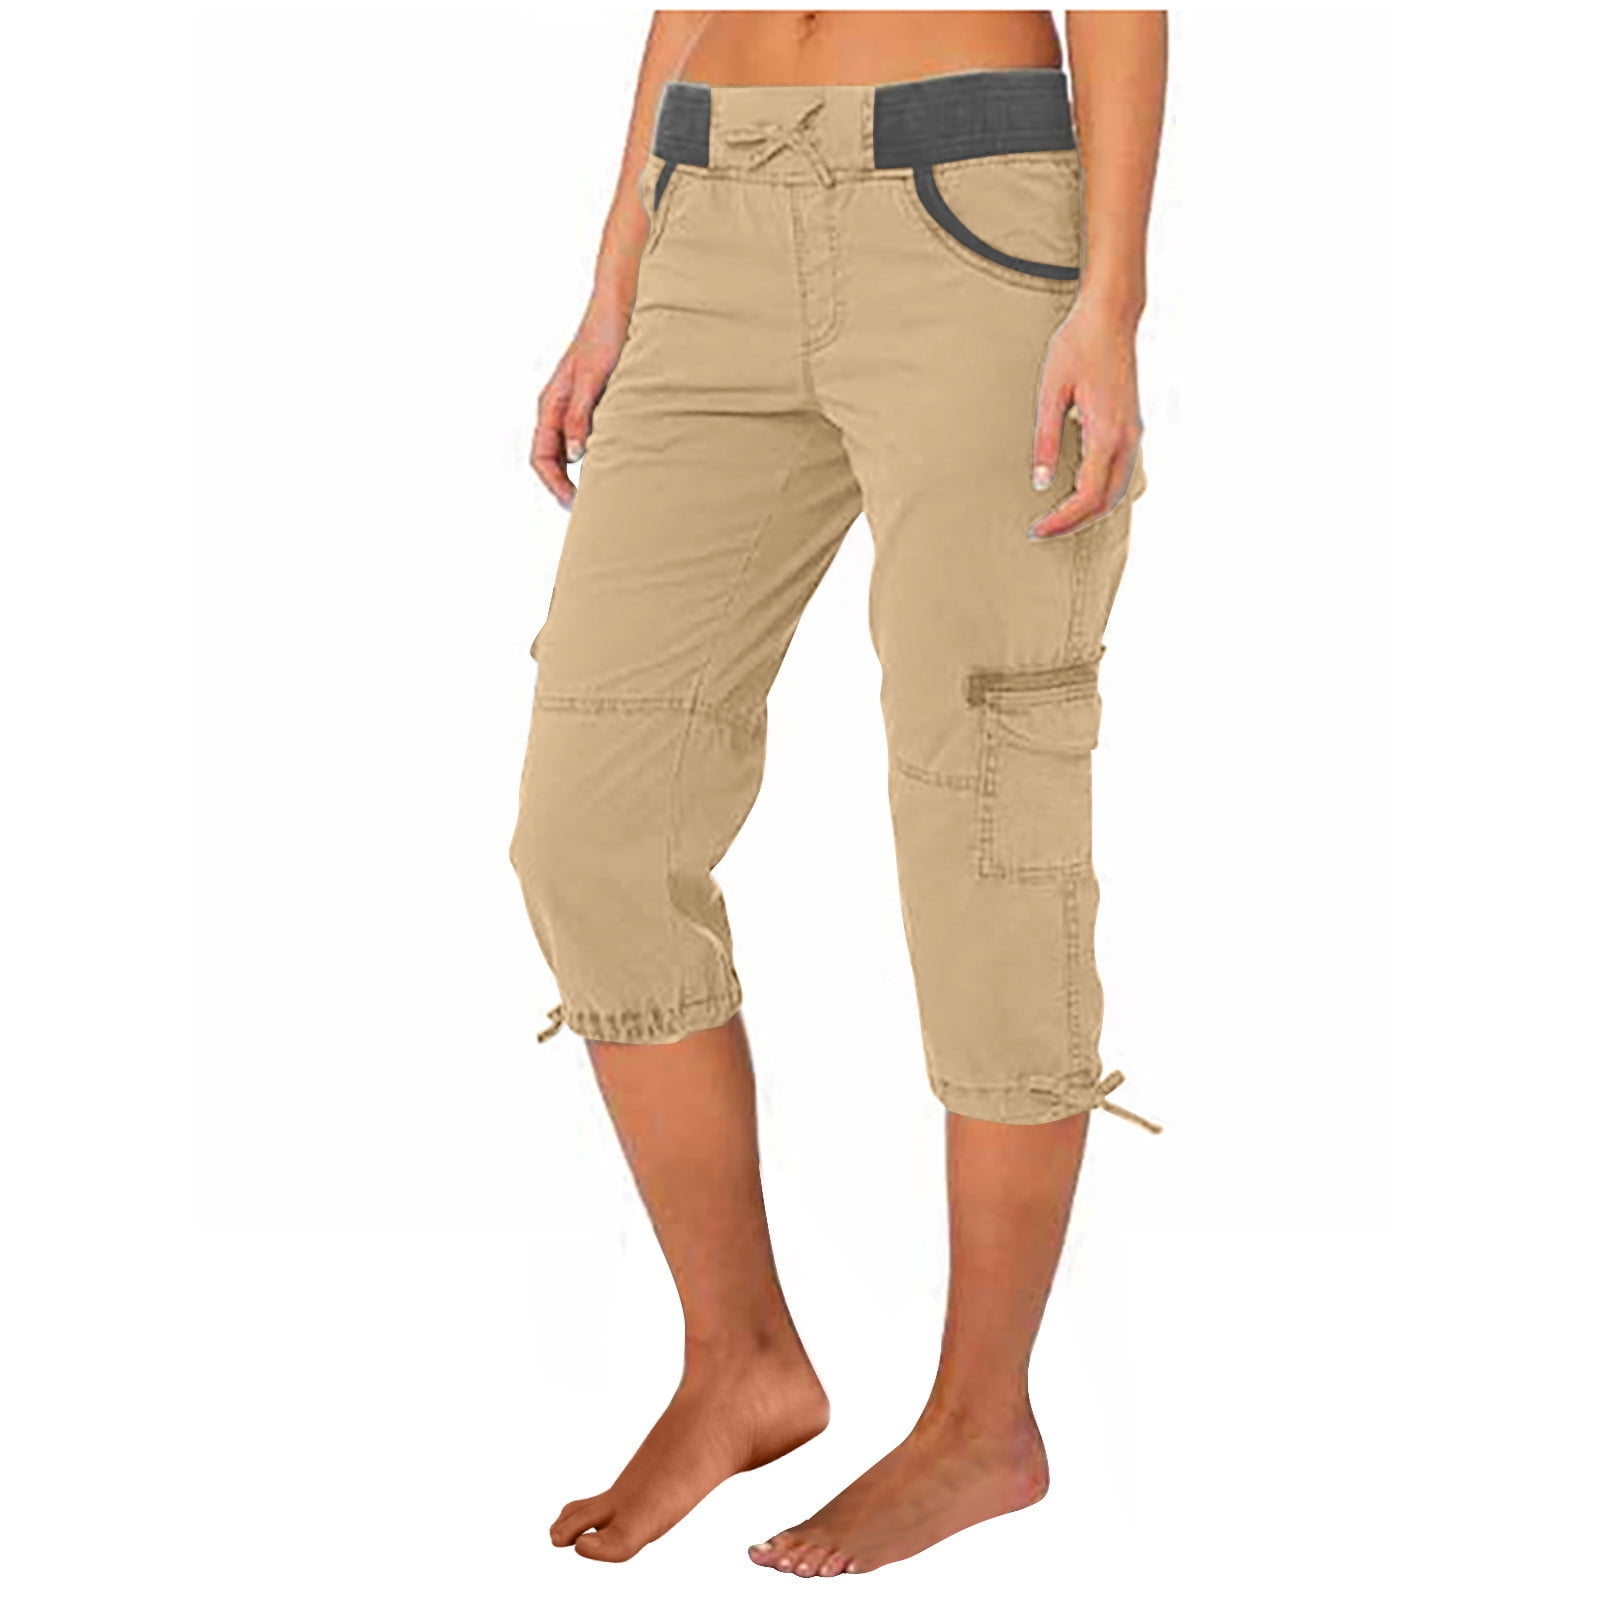 Dyegold Capri Cargo Pants For Women High Waist Casual Loose Fit